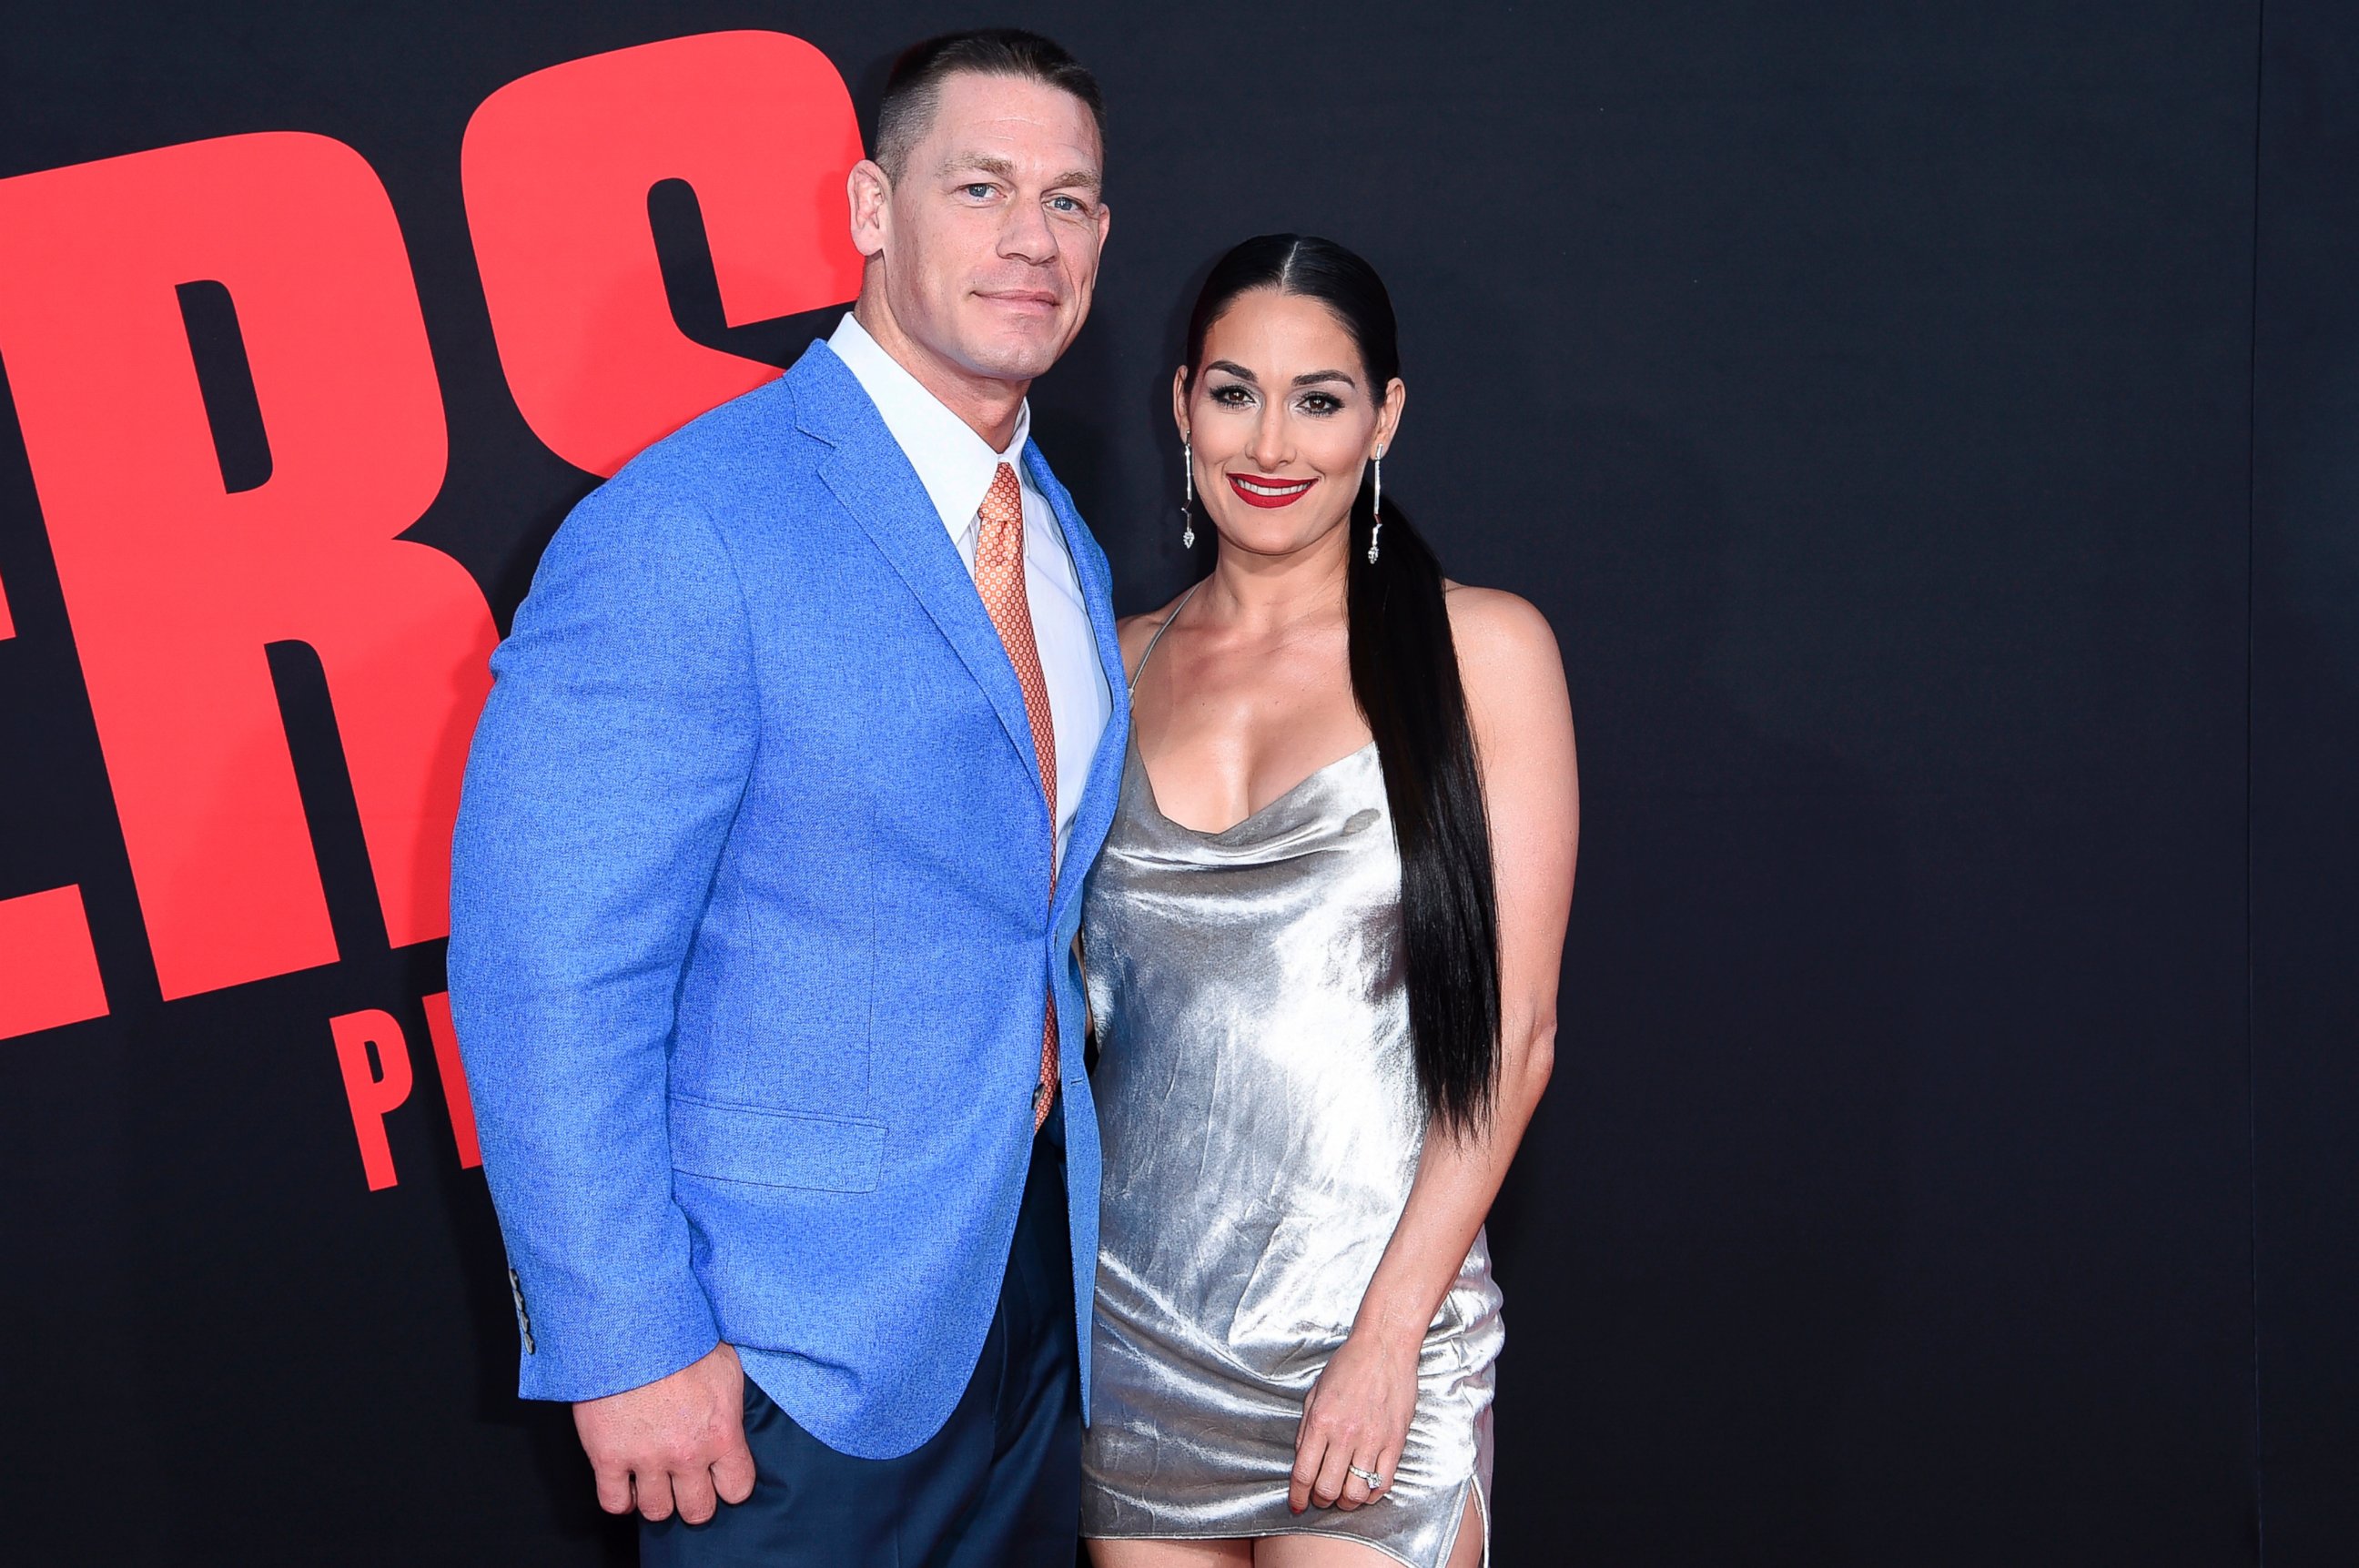 In this Tuesday, April 3, 2018, photo, John Cena, left, and Nikki Bella attend the LA Premiere of "Blockers" at the Regency Village Theatre in Los Angeles. 